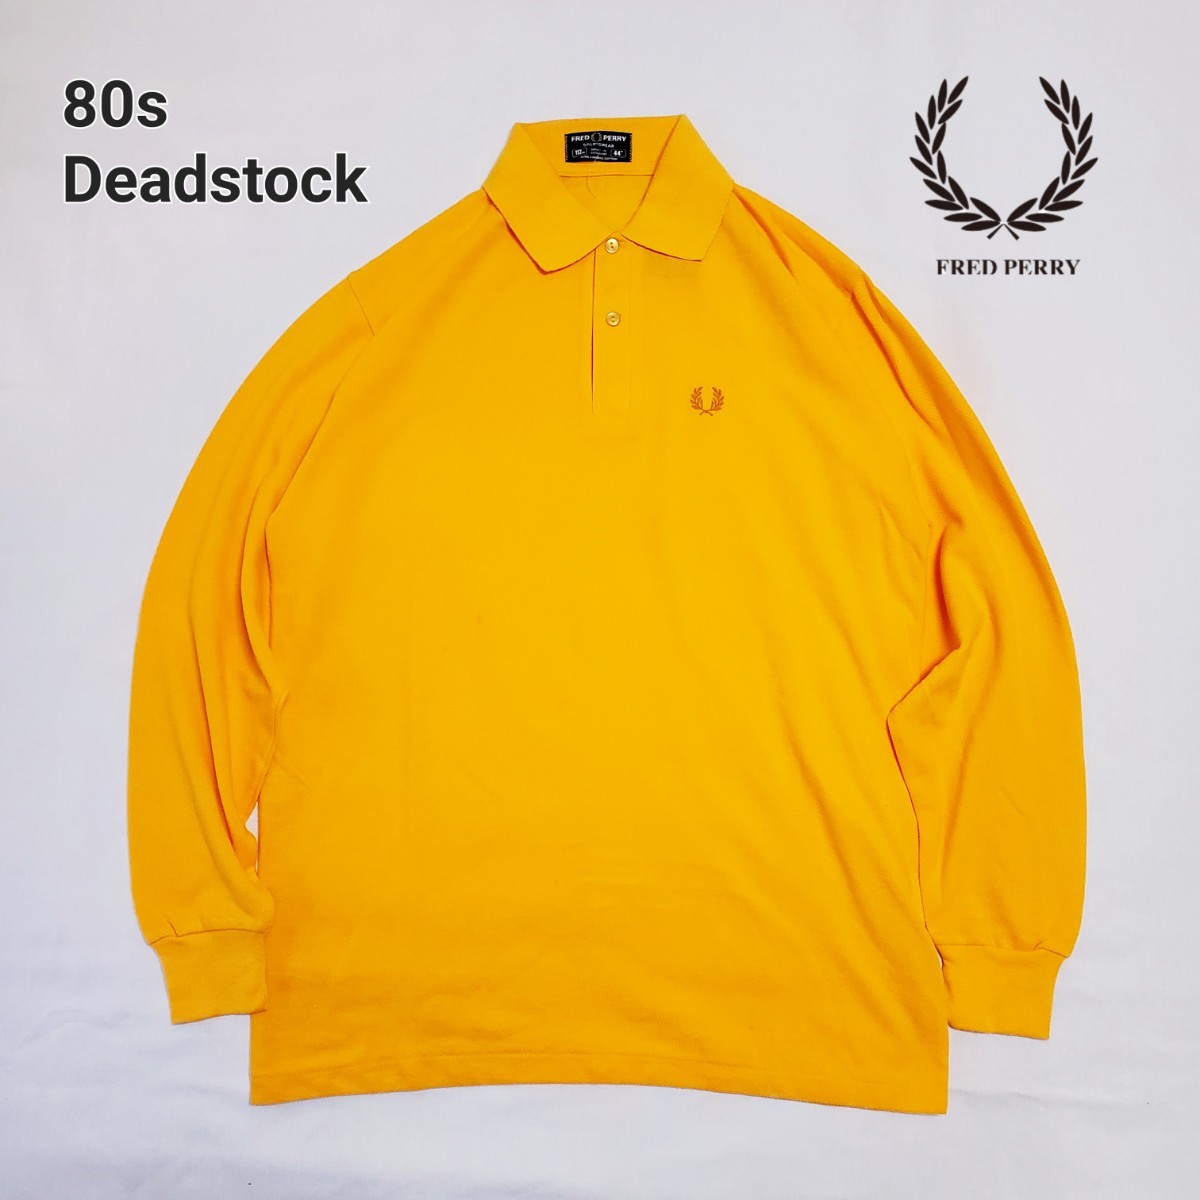 80s DEADSTOCK FRED PERRY フレッドペリー ポロシャツ